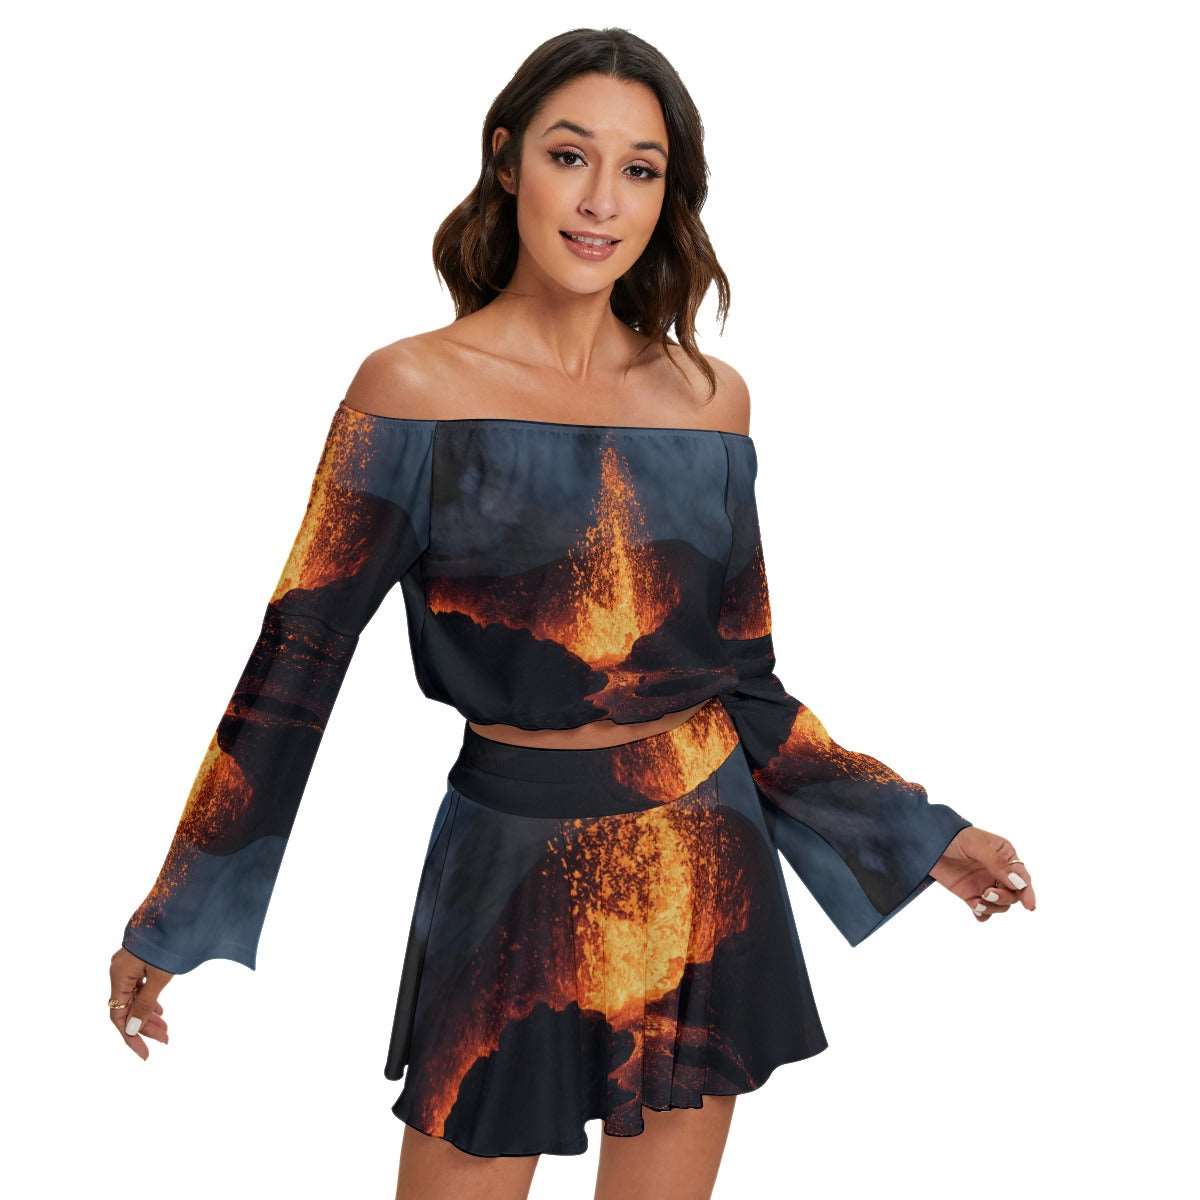 FIred up Ice Queen Women's Off-shoulder Top And Skirt Set